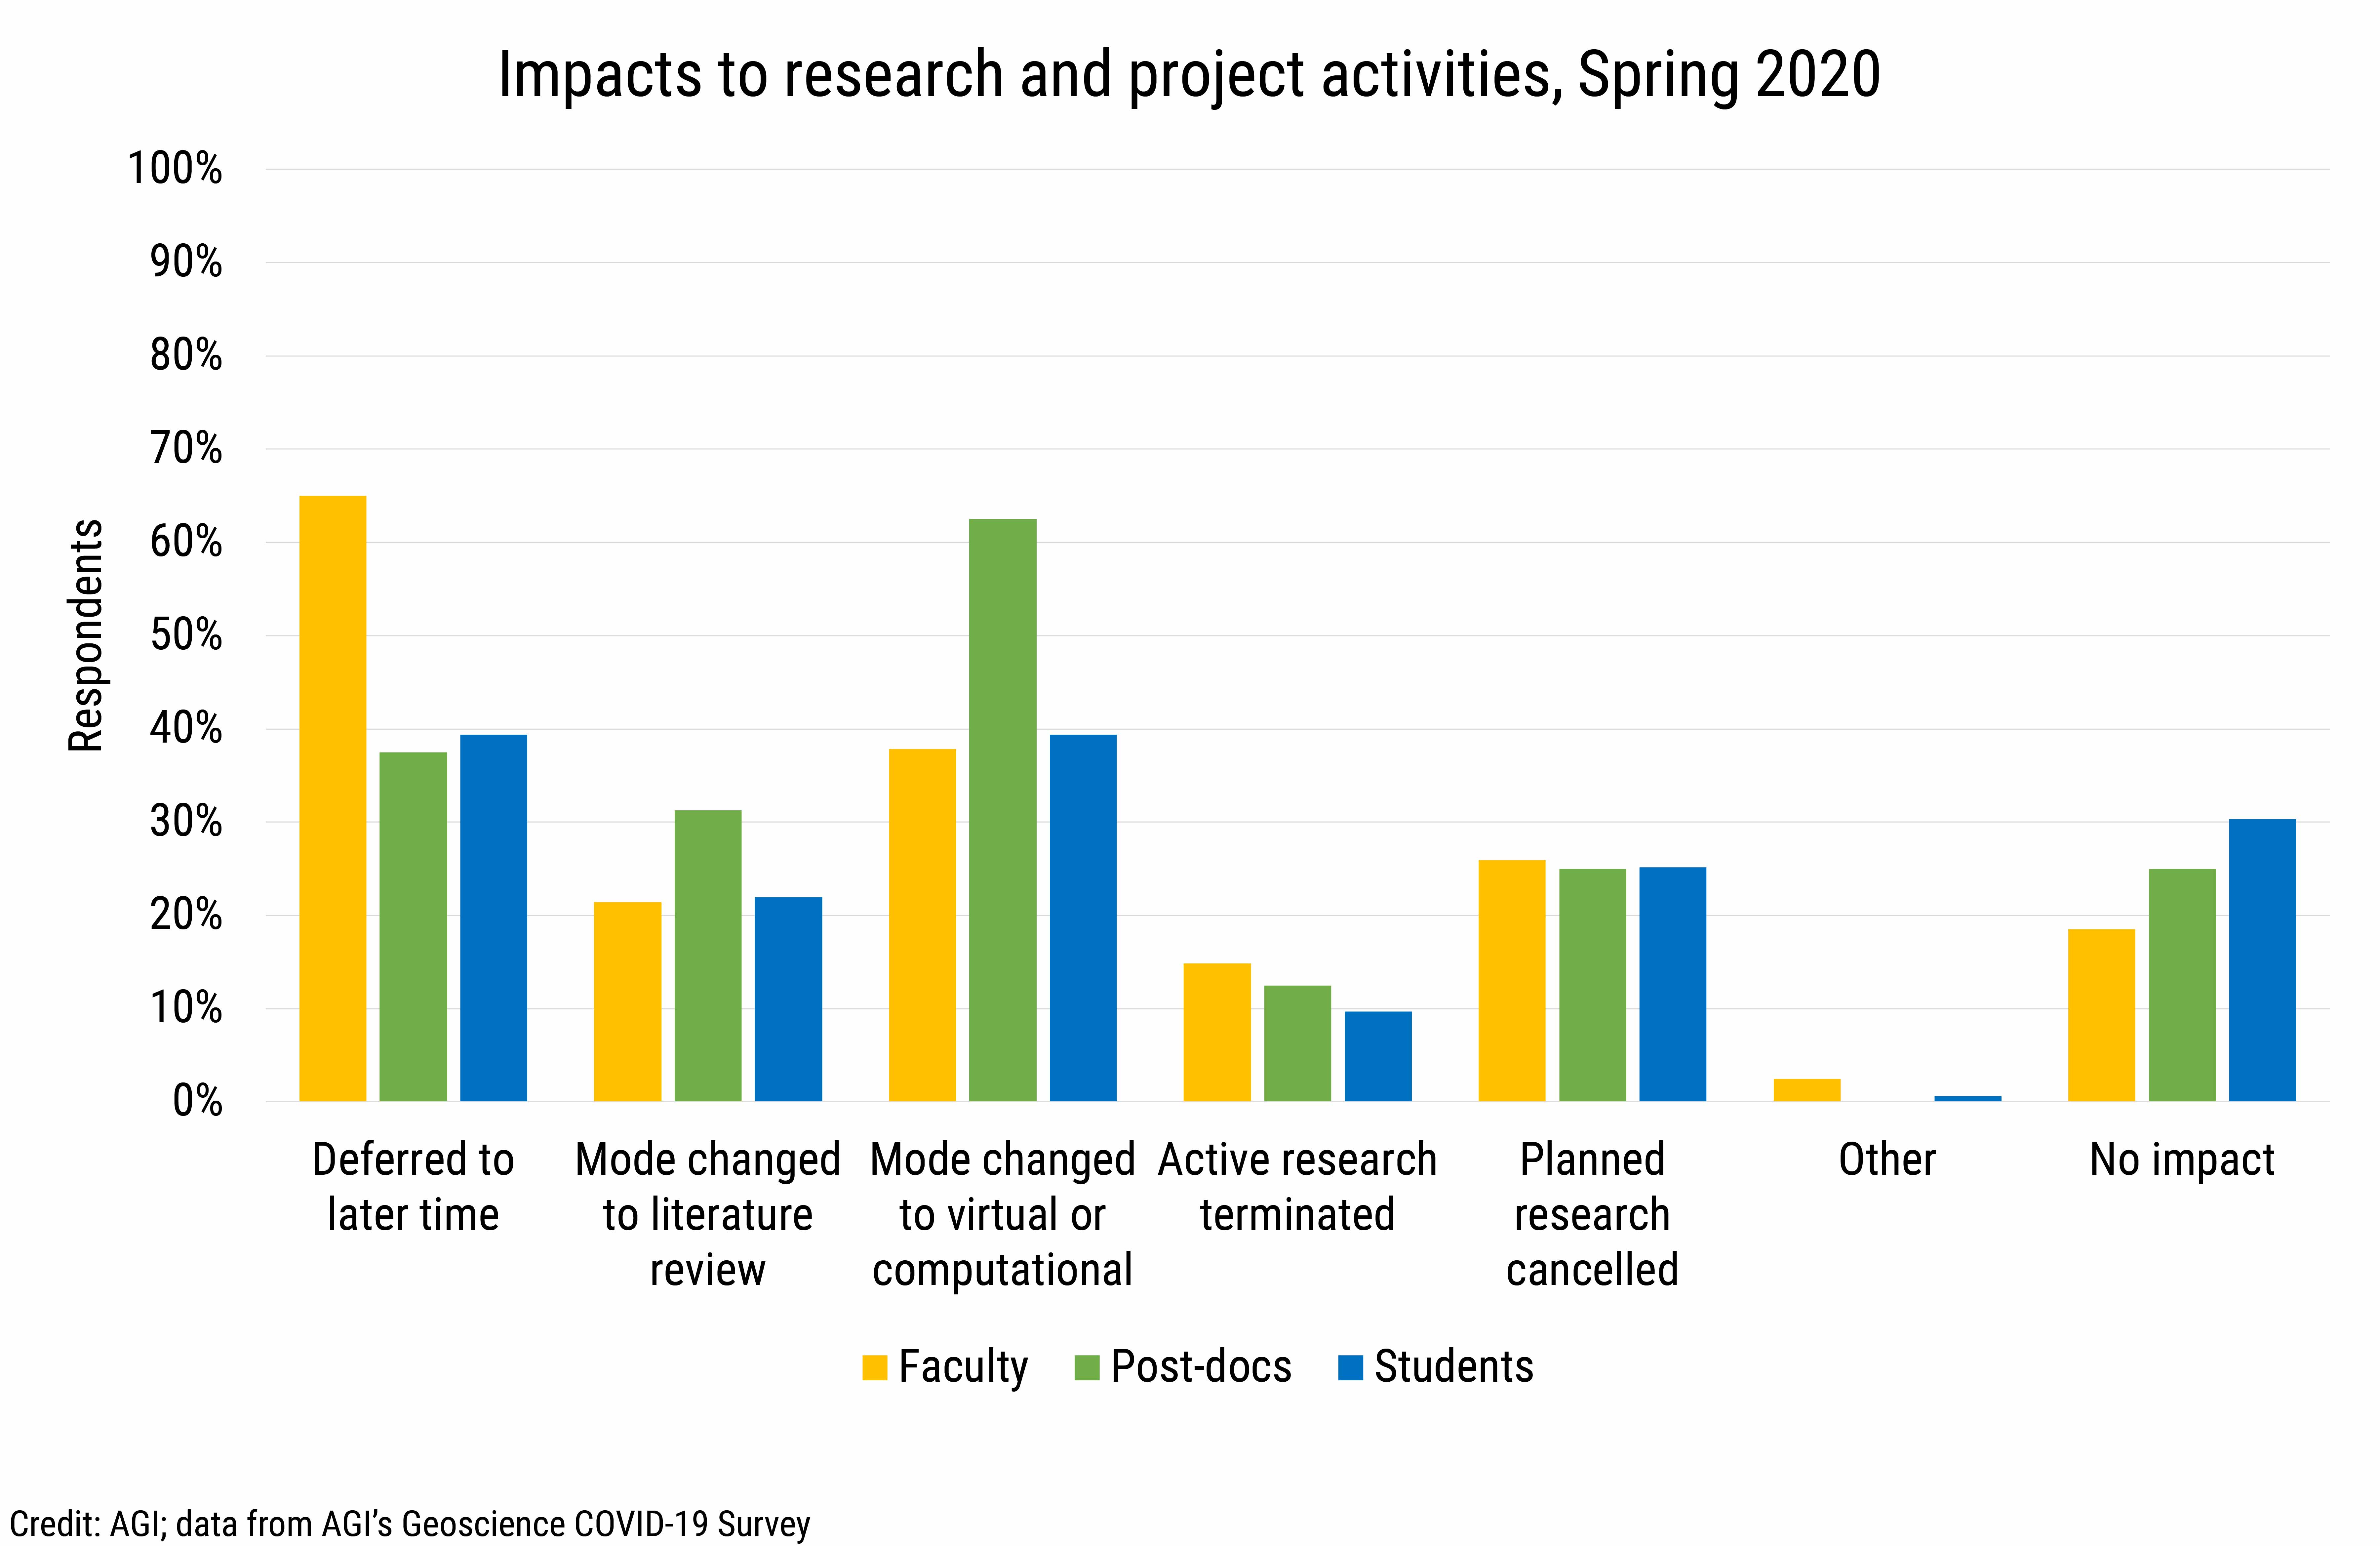 DB2020-021: chart 05:Impacts to projects and research activities, Spring 2020 (Credit: AGI; data from AGI’s Geoscience COVID-19 Survey)